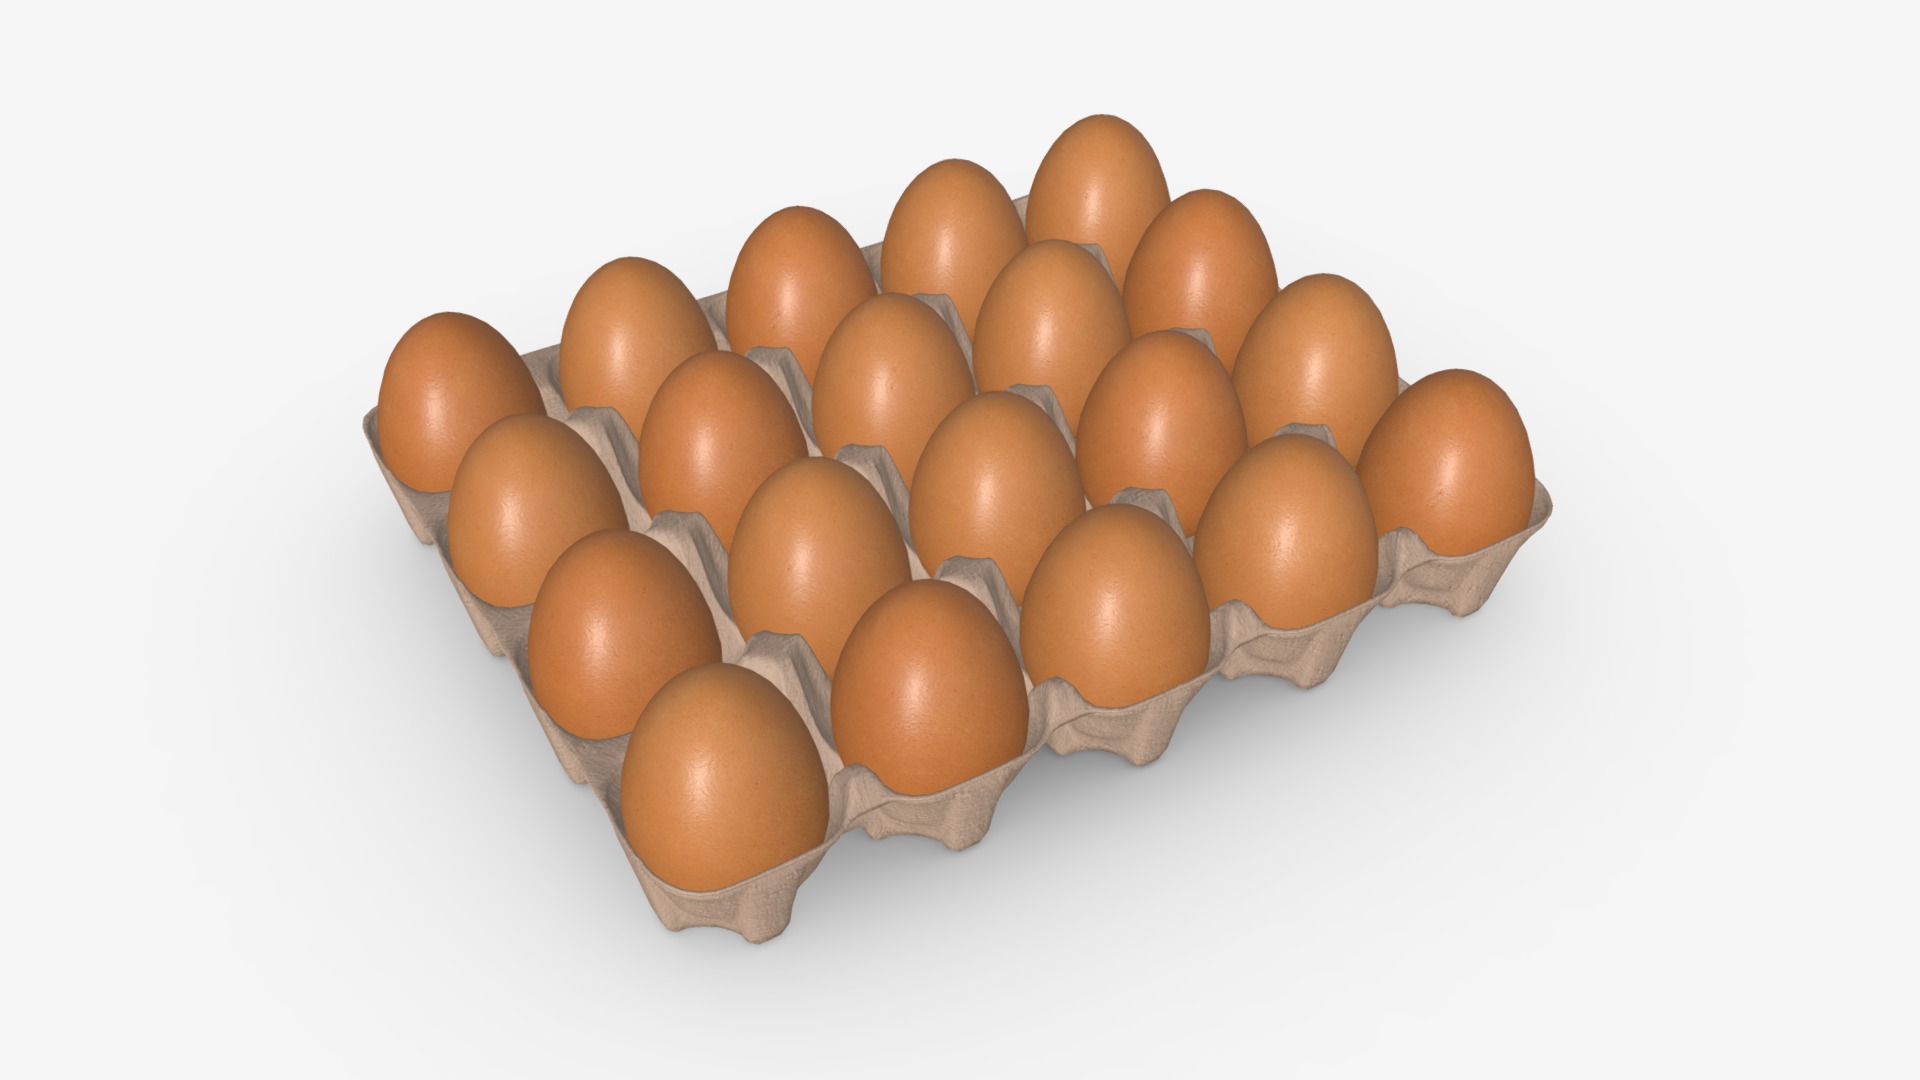 3D model Egg cardboard base 20 eggs - This is a 3D model of the Egg cardboard base 20 eggs. The 3D model is about a carton of brown eggs.